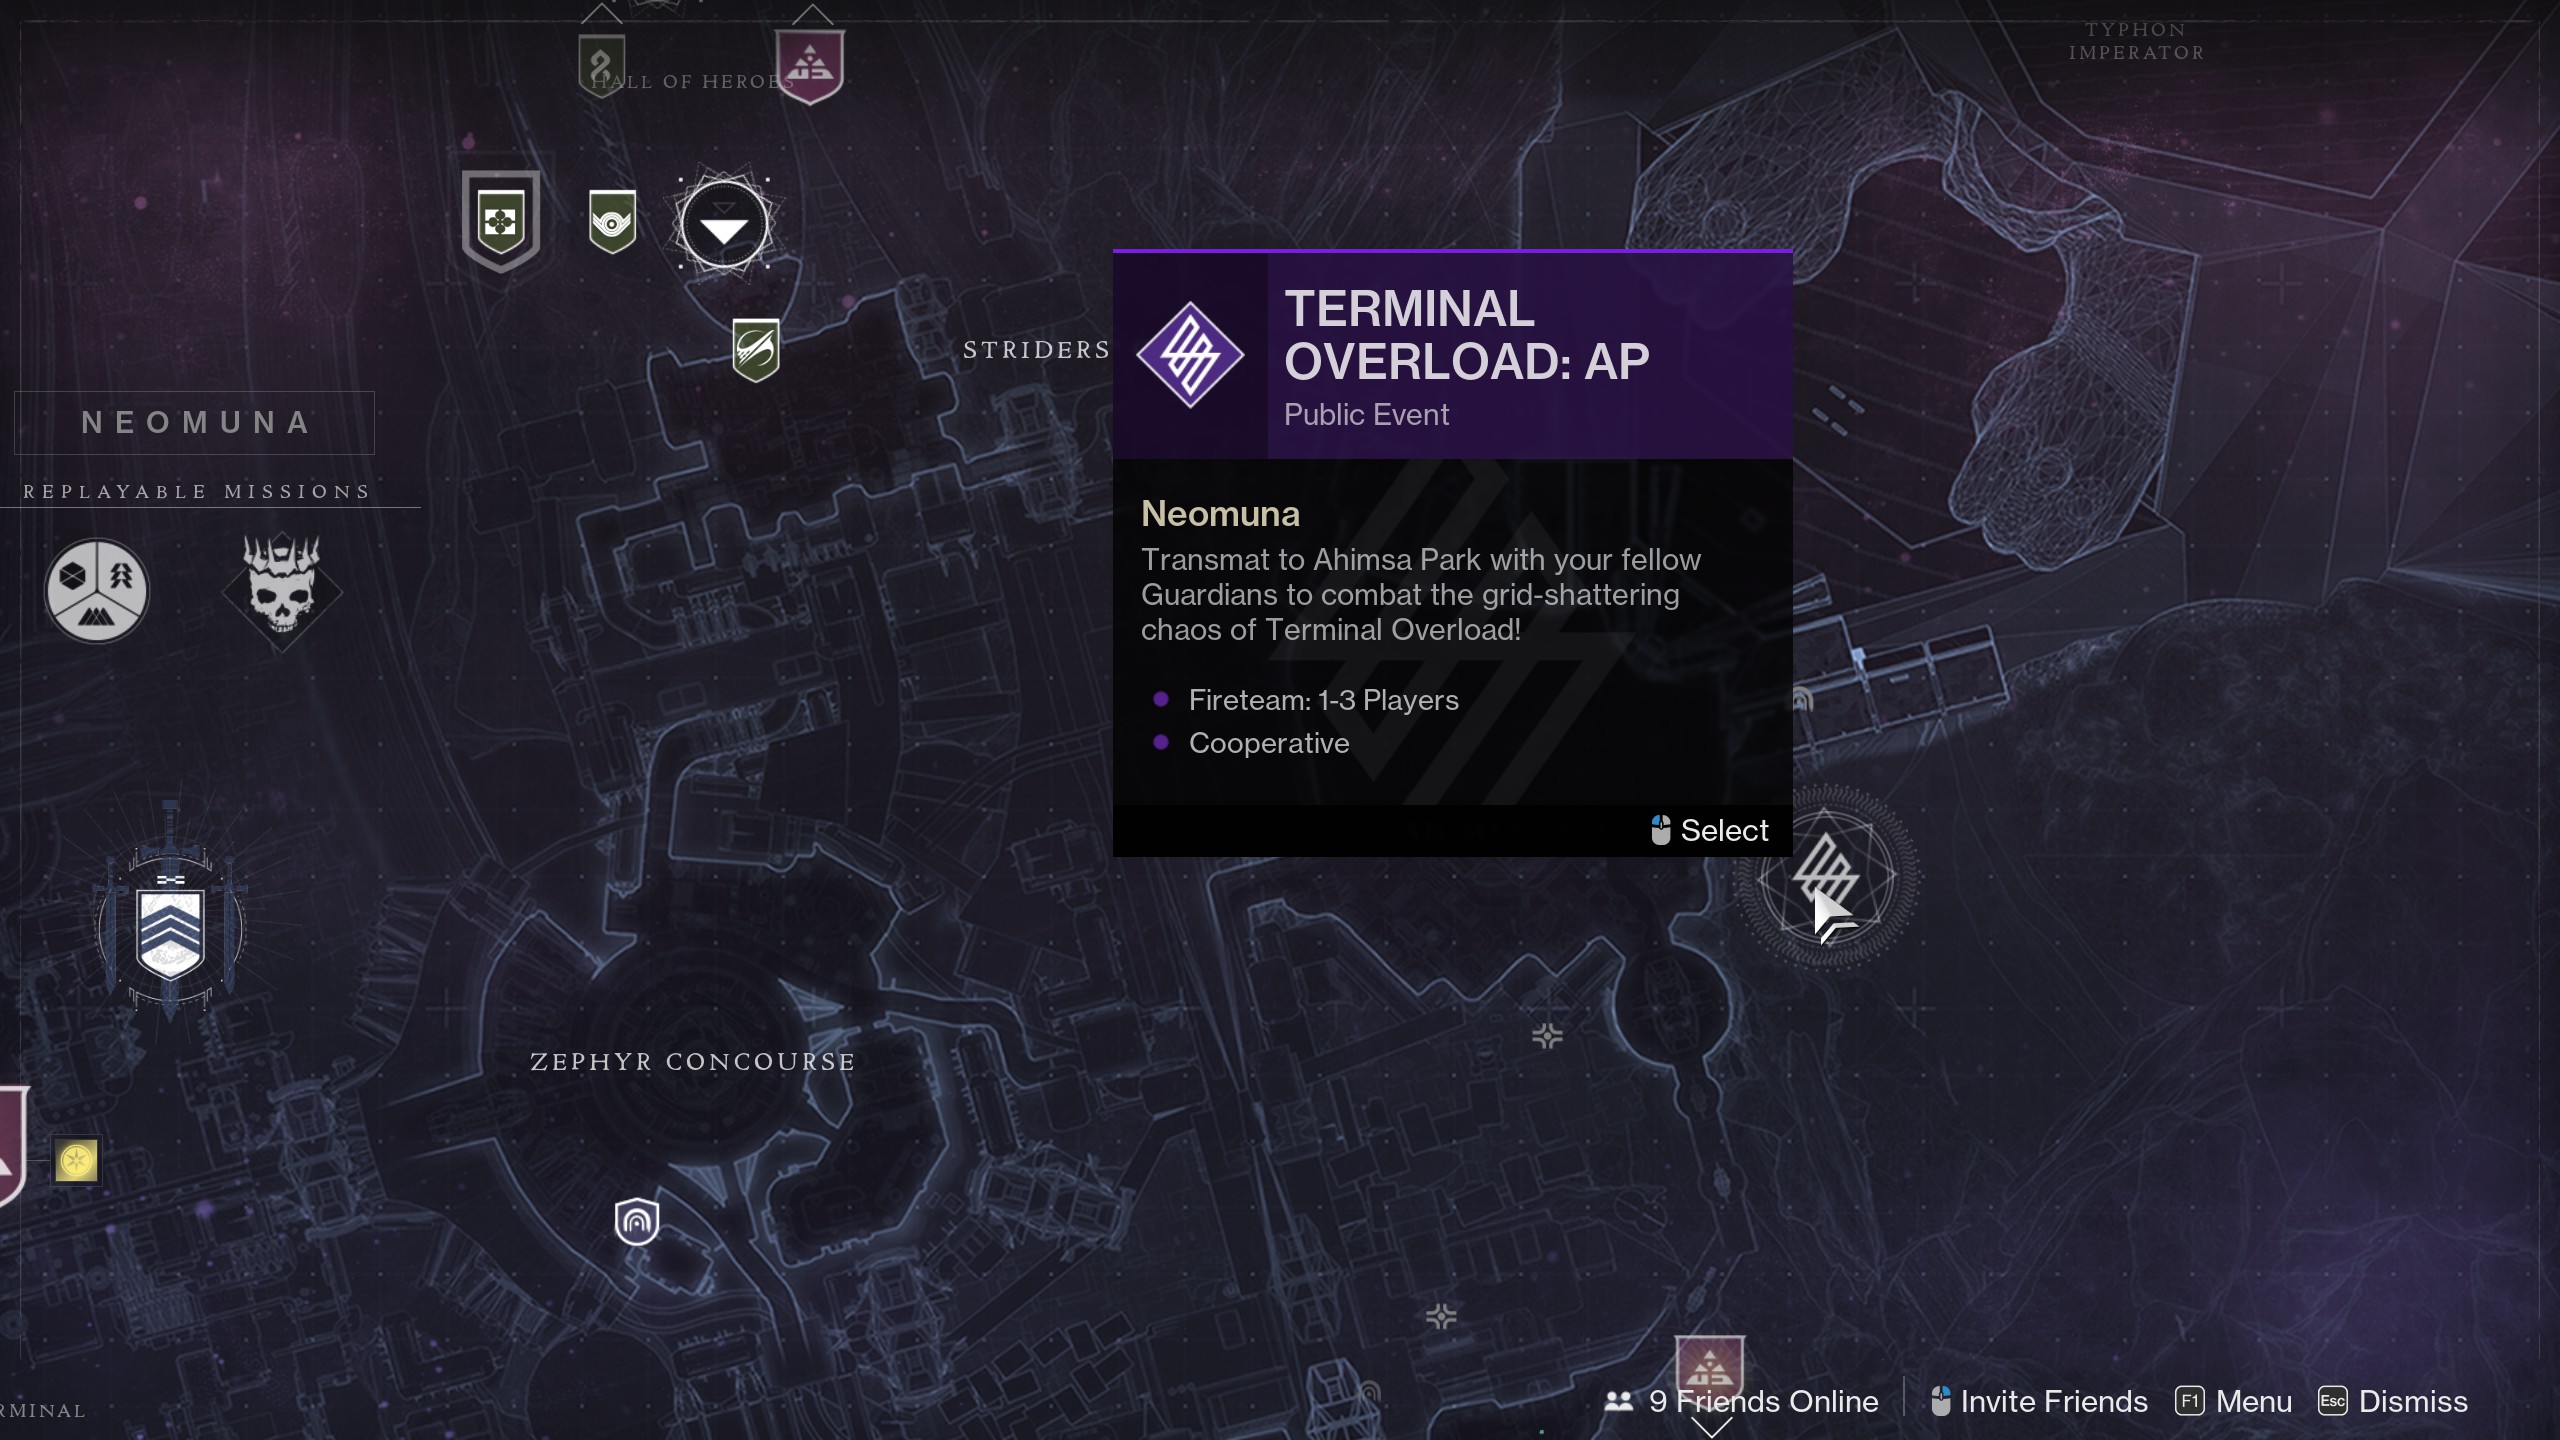 Destiny 2 Terminal Overload Events on Maps